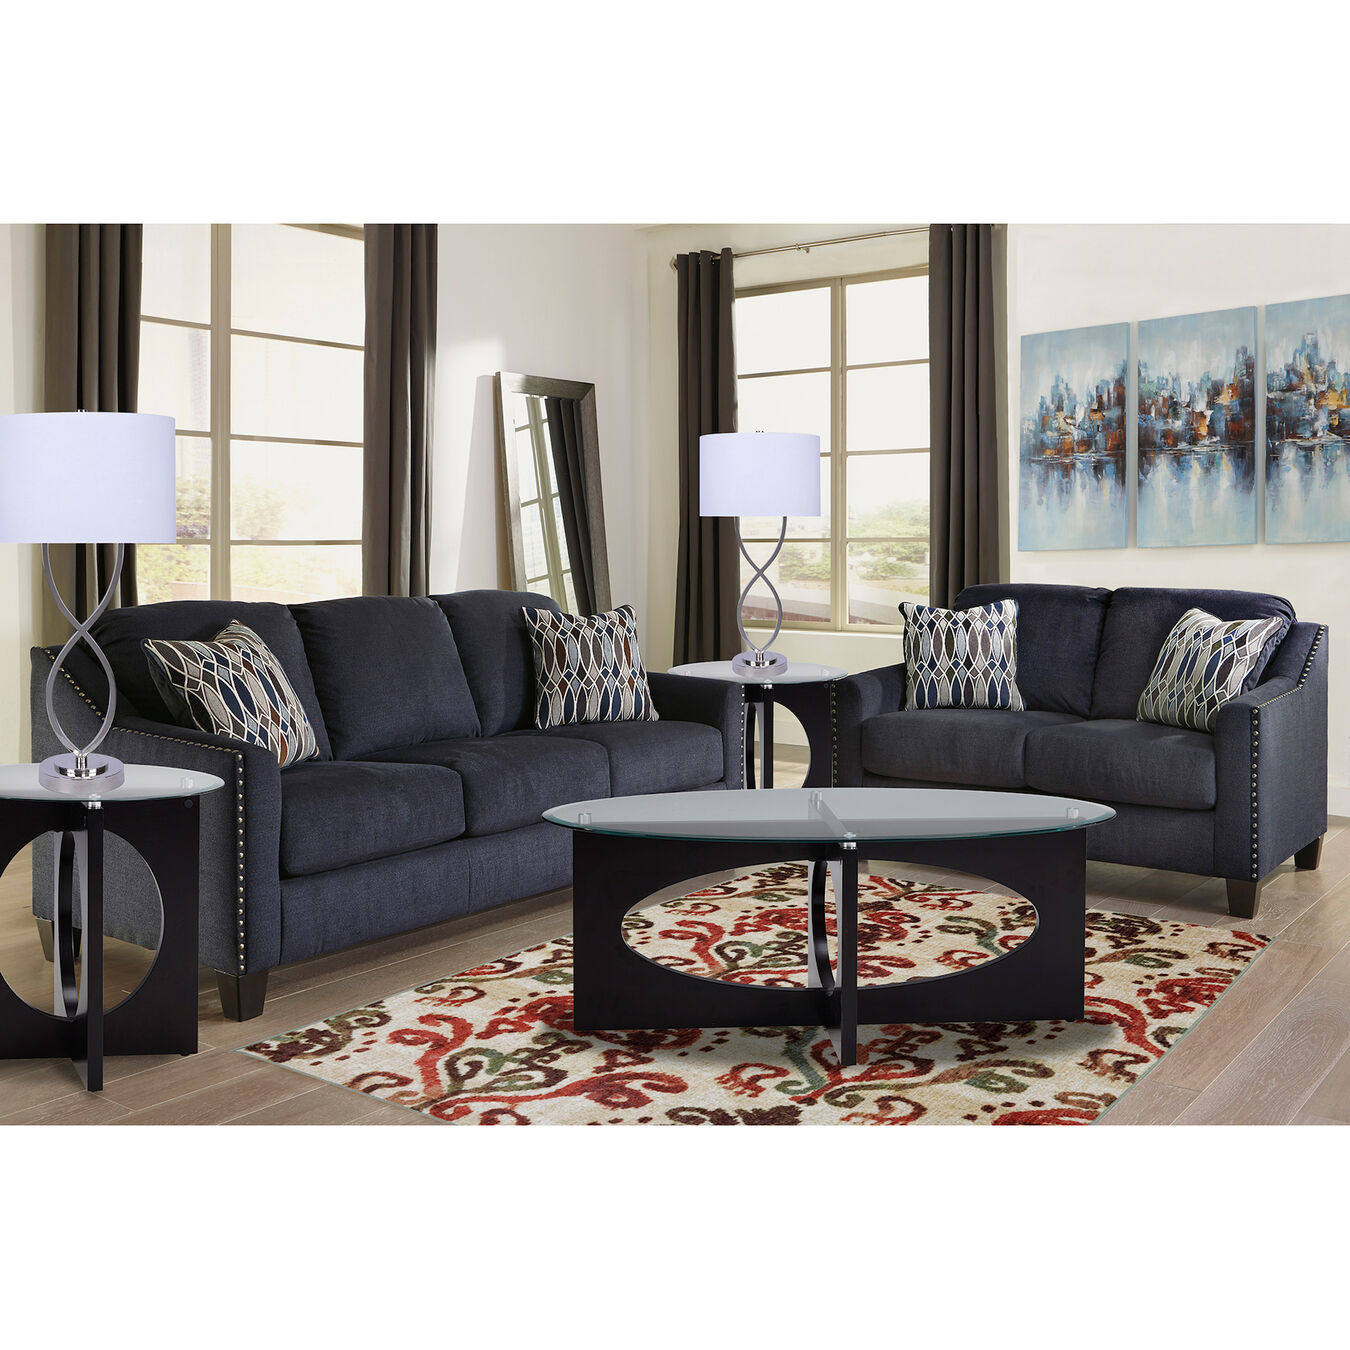 Ashley Furniture Ind. Sofa \u0026 Loveseat Sets 2Piece Creeal Heights Living Room Collection